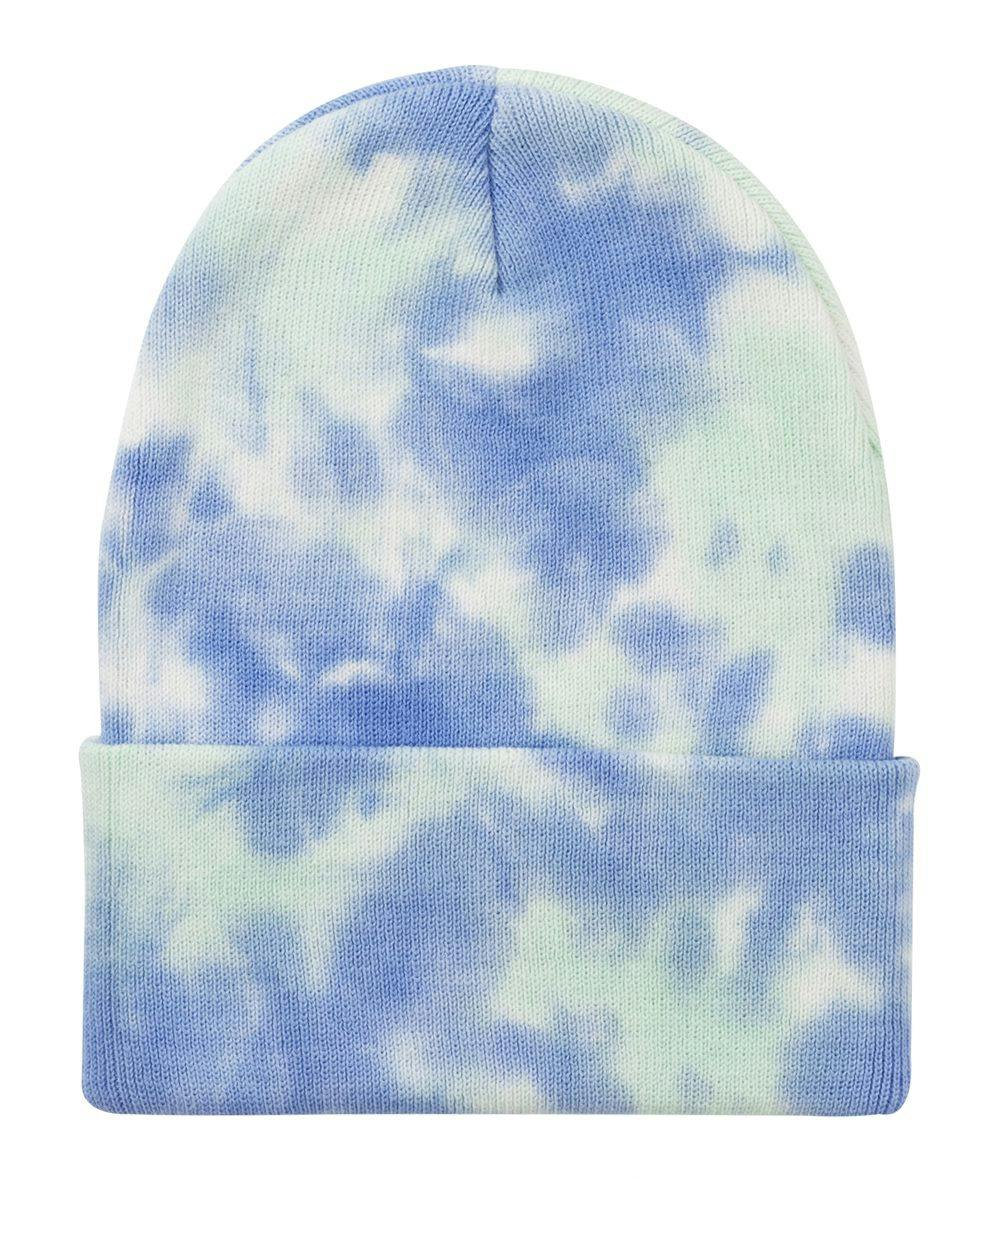 Image for 12" Tie-Dyed Cuffed Beanie - SP412